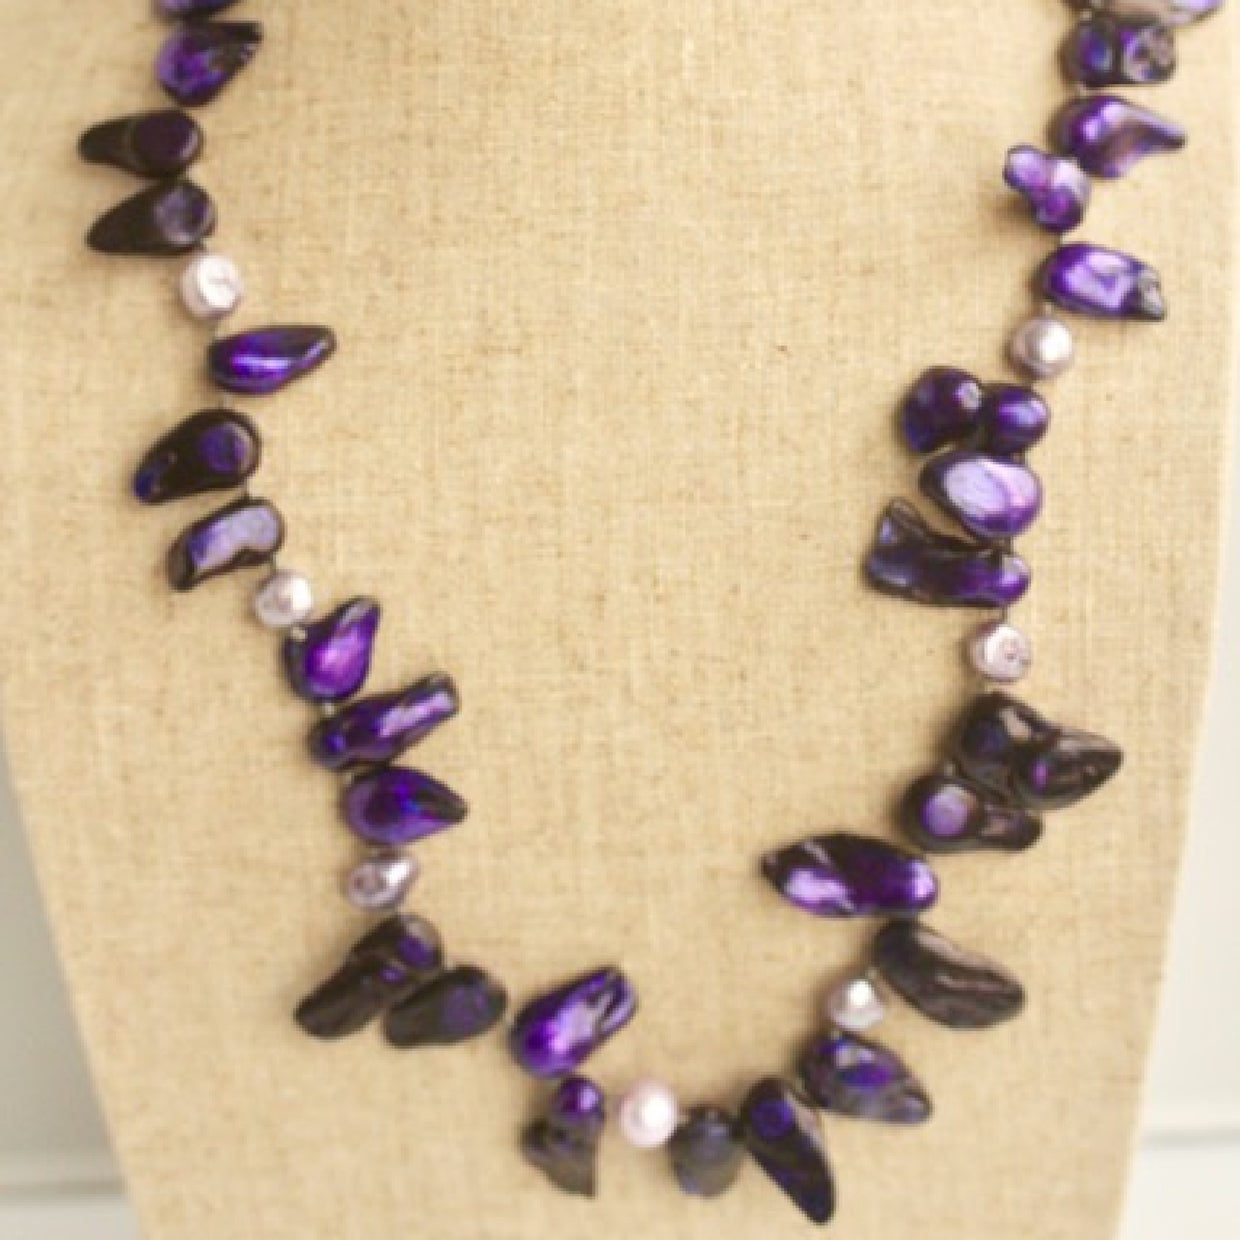 Partial View of knotted Purple Blister Pearl Necklace hanging on Linen Bust